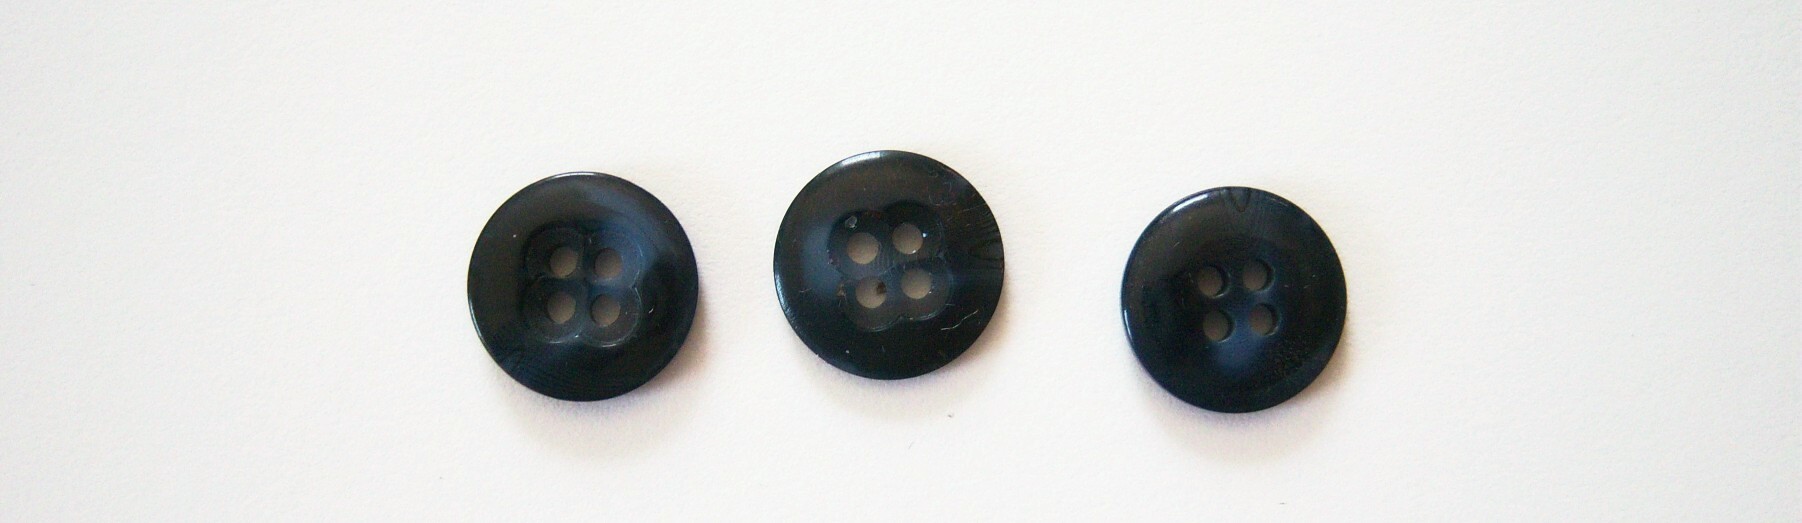 Navy/Blue Marbled 5/8" Poly 4 Hole Button